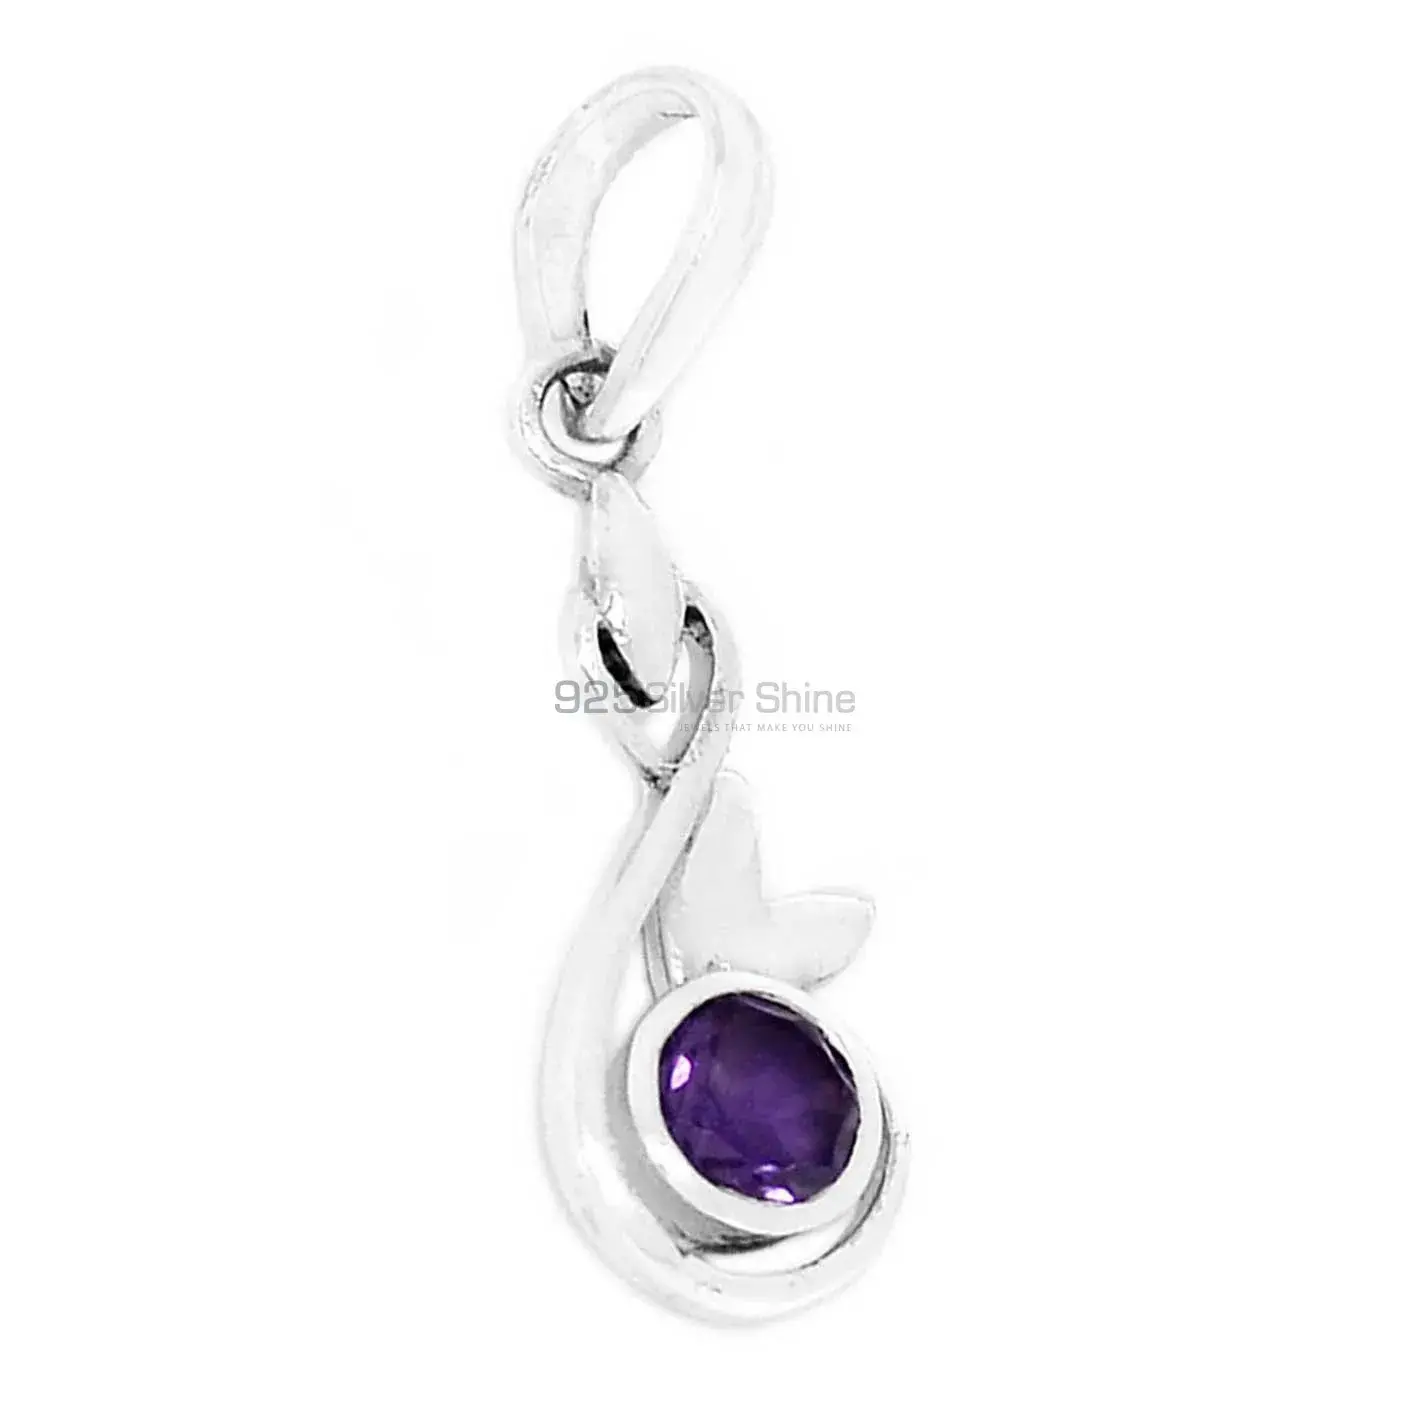 High Quality Amethyst Gemstone Handmade Pendants In Solid Sterling Silver Jewelry 925SP286-4_1